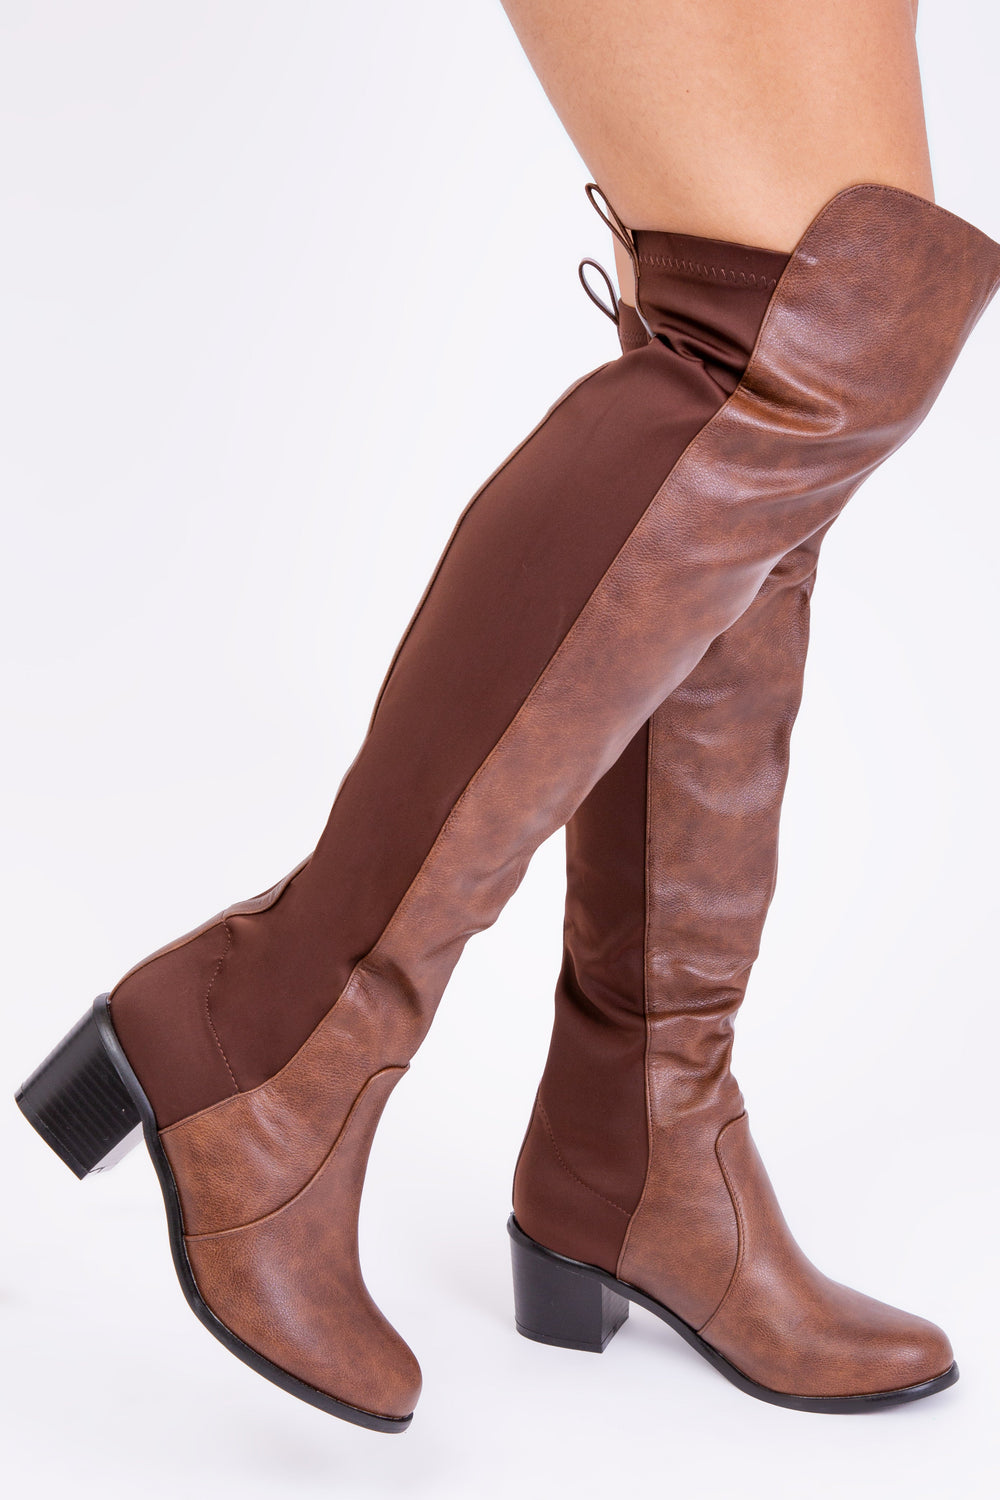 BRITTA THIGH HIGH MID HEELED BOOTS IN BROWN FAUX LEATHER